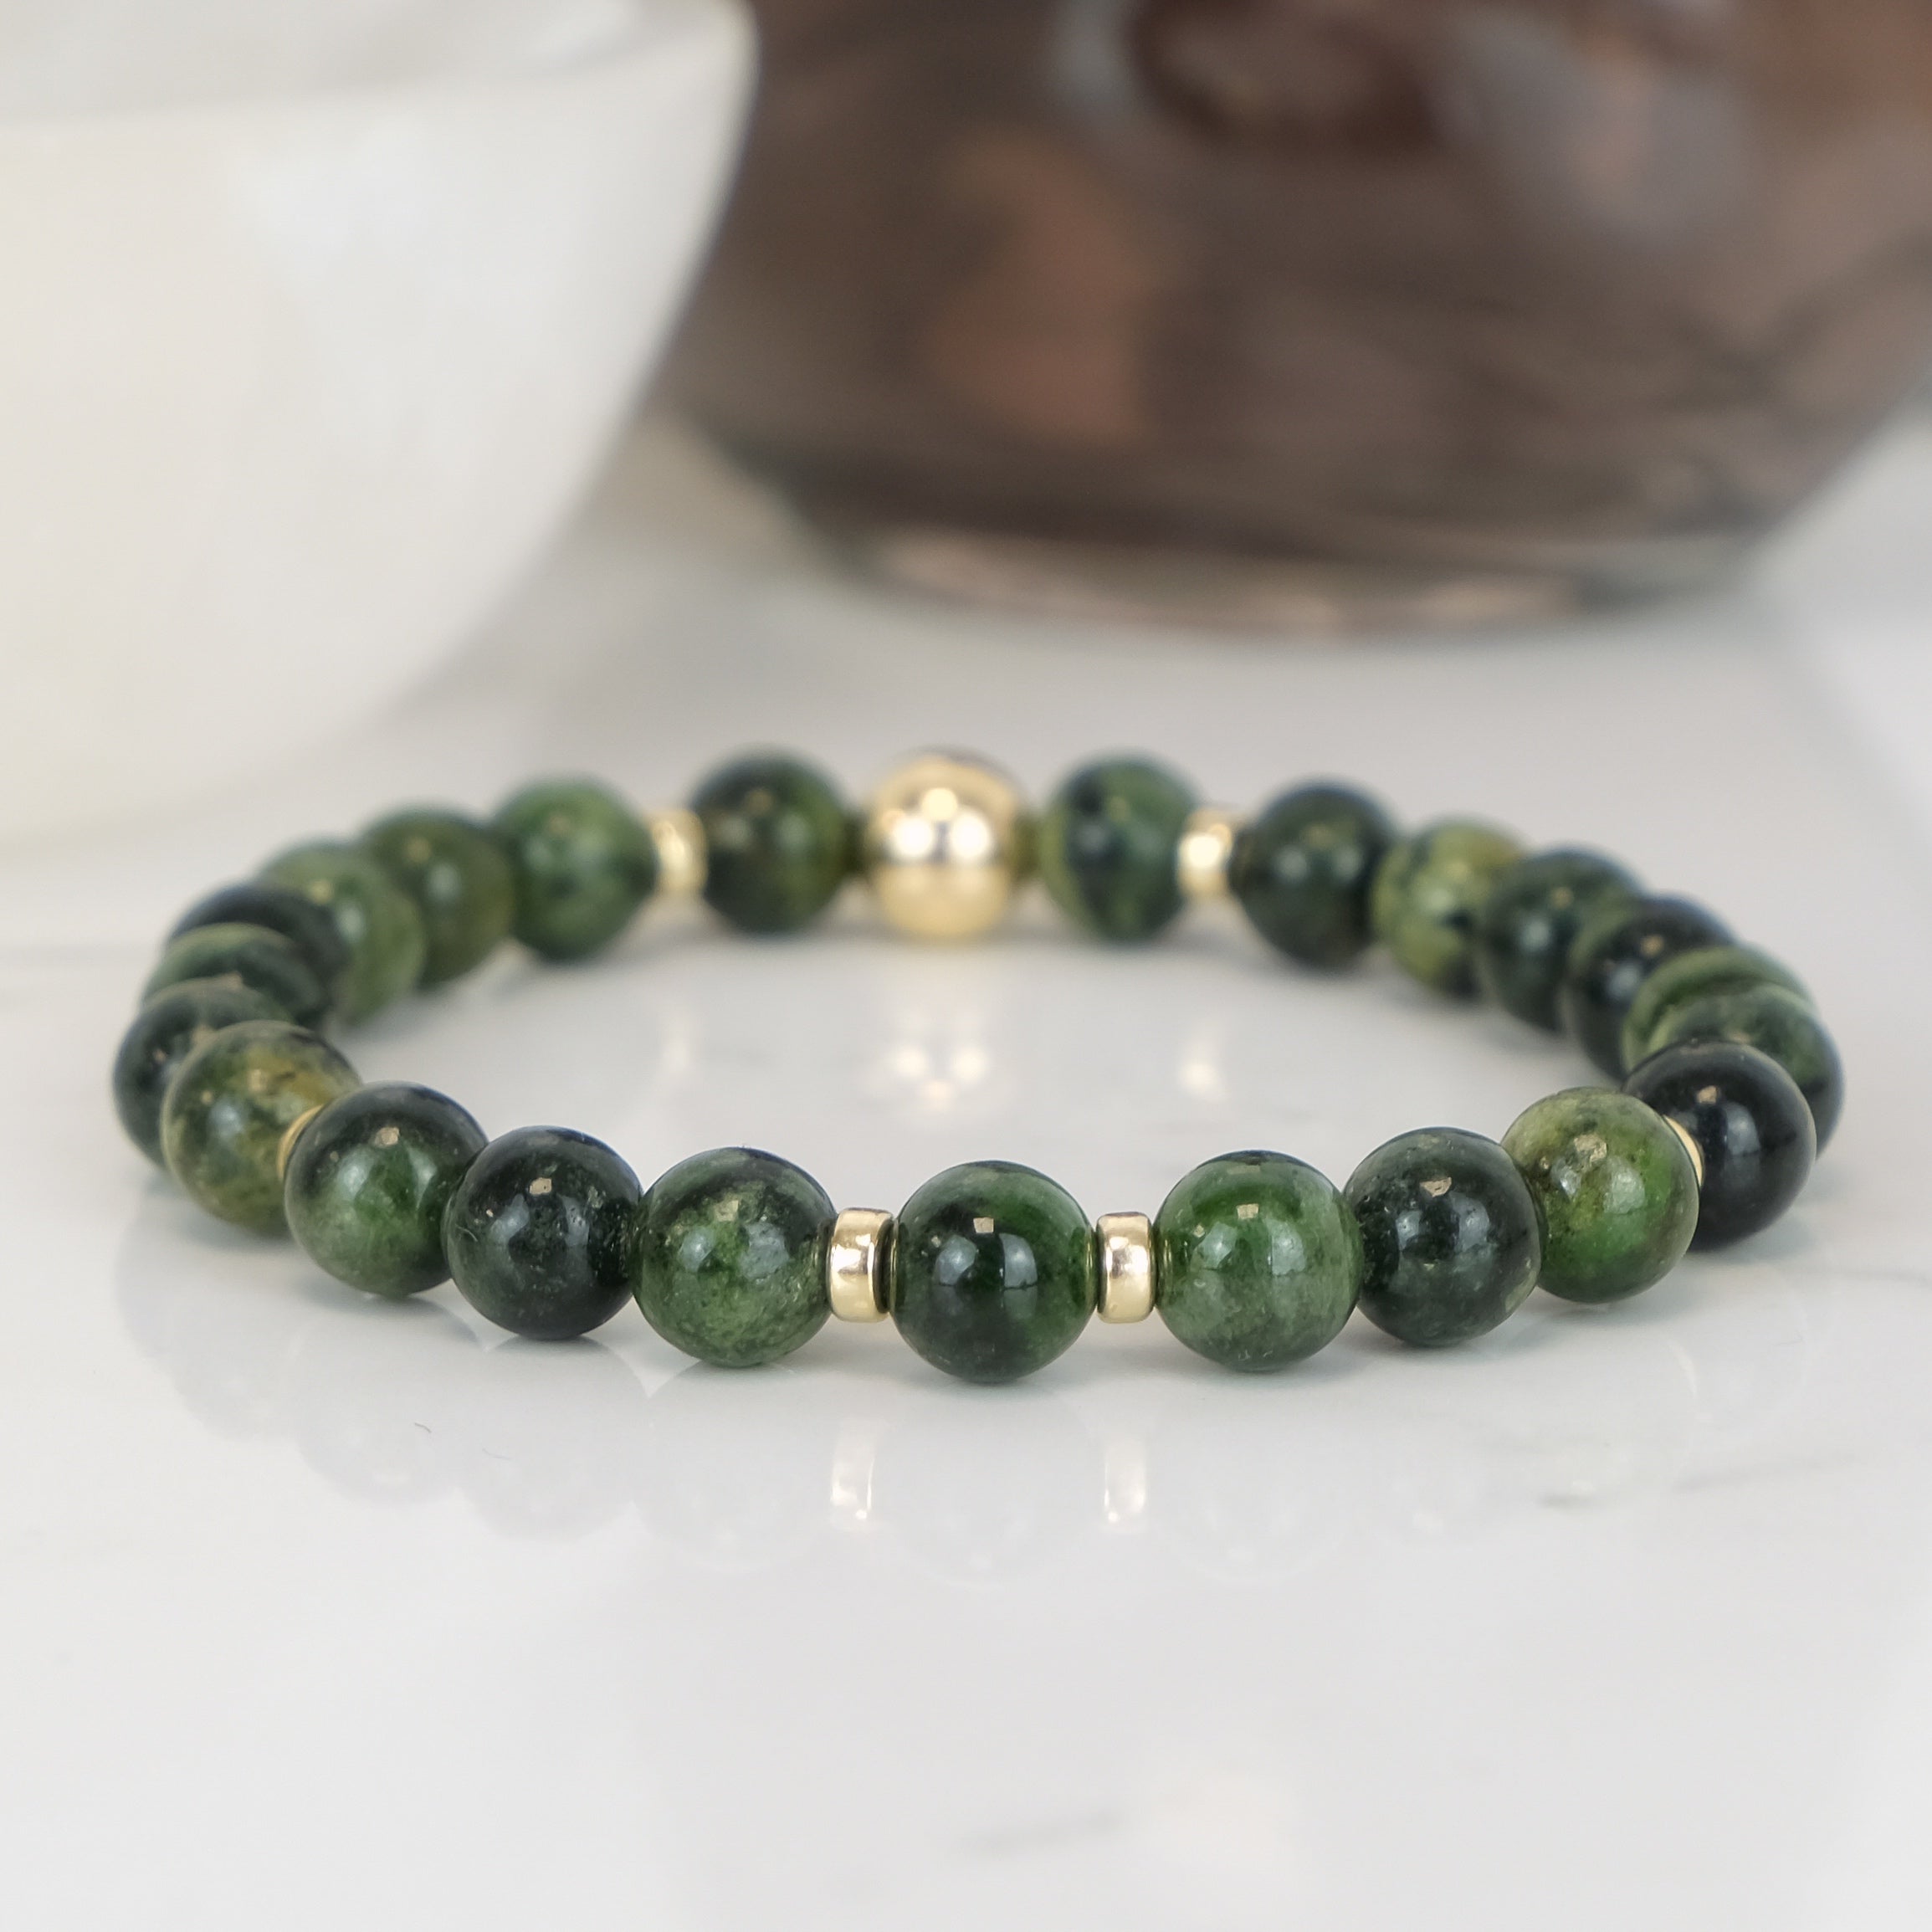 Diopside gemstone bracelet with gold filled accessories